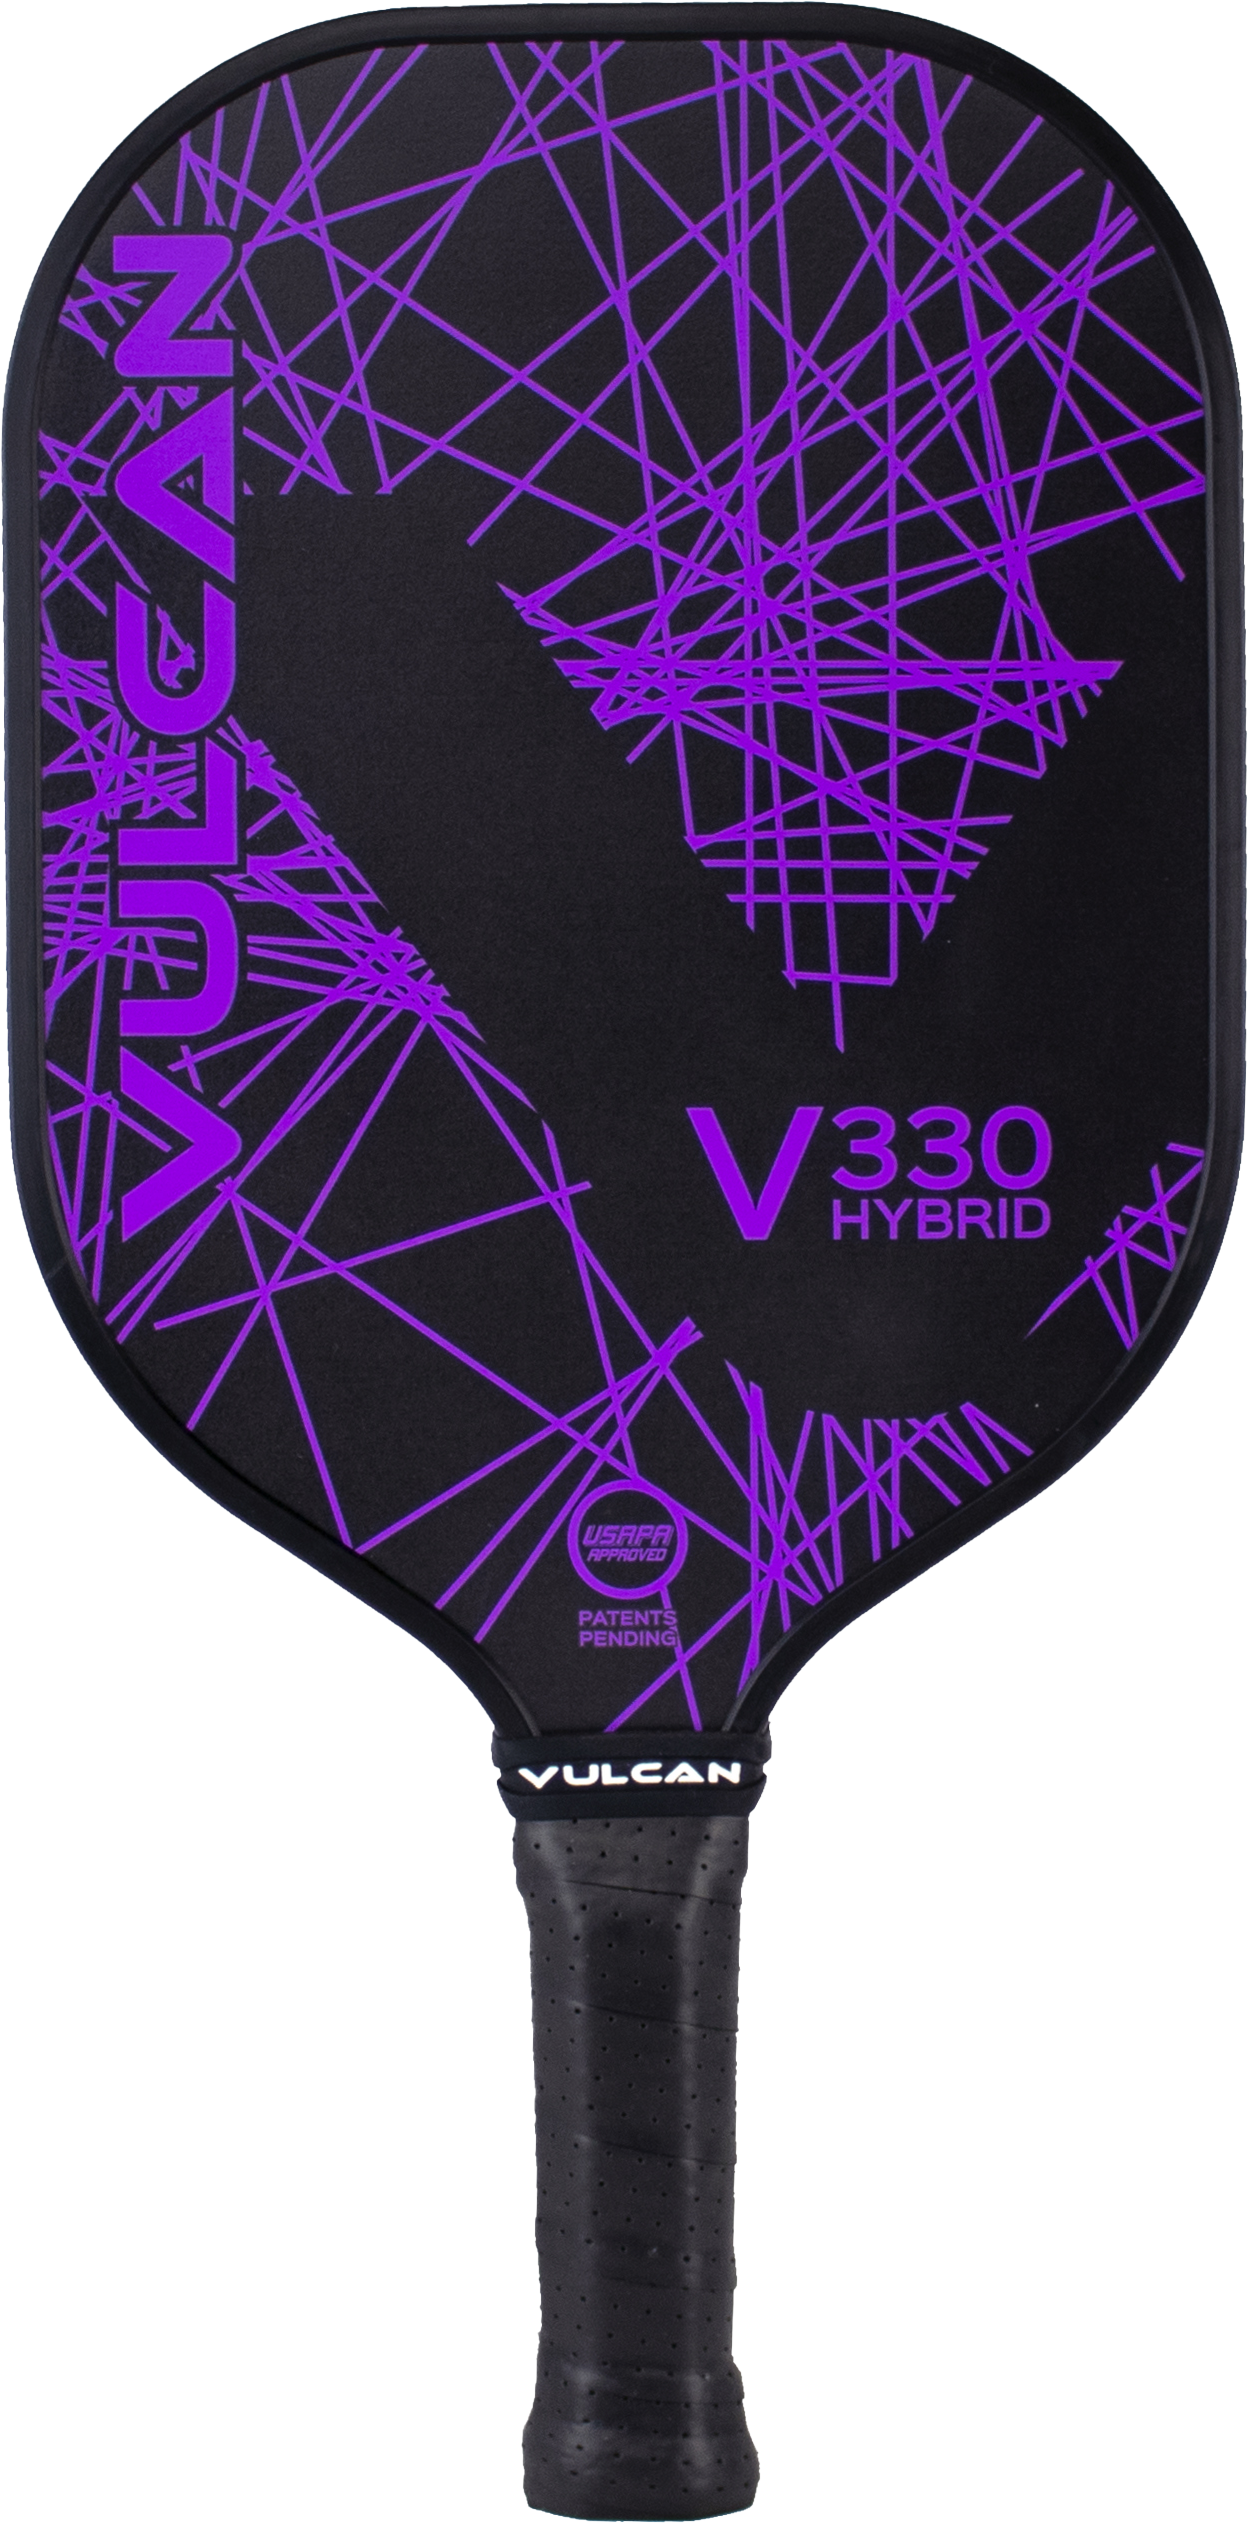 A purple and black Vulcan V330 Pickleball Paddle on a white background.